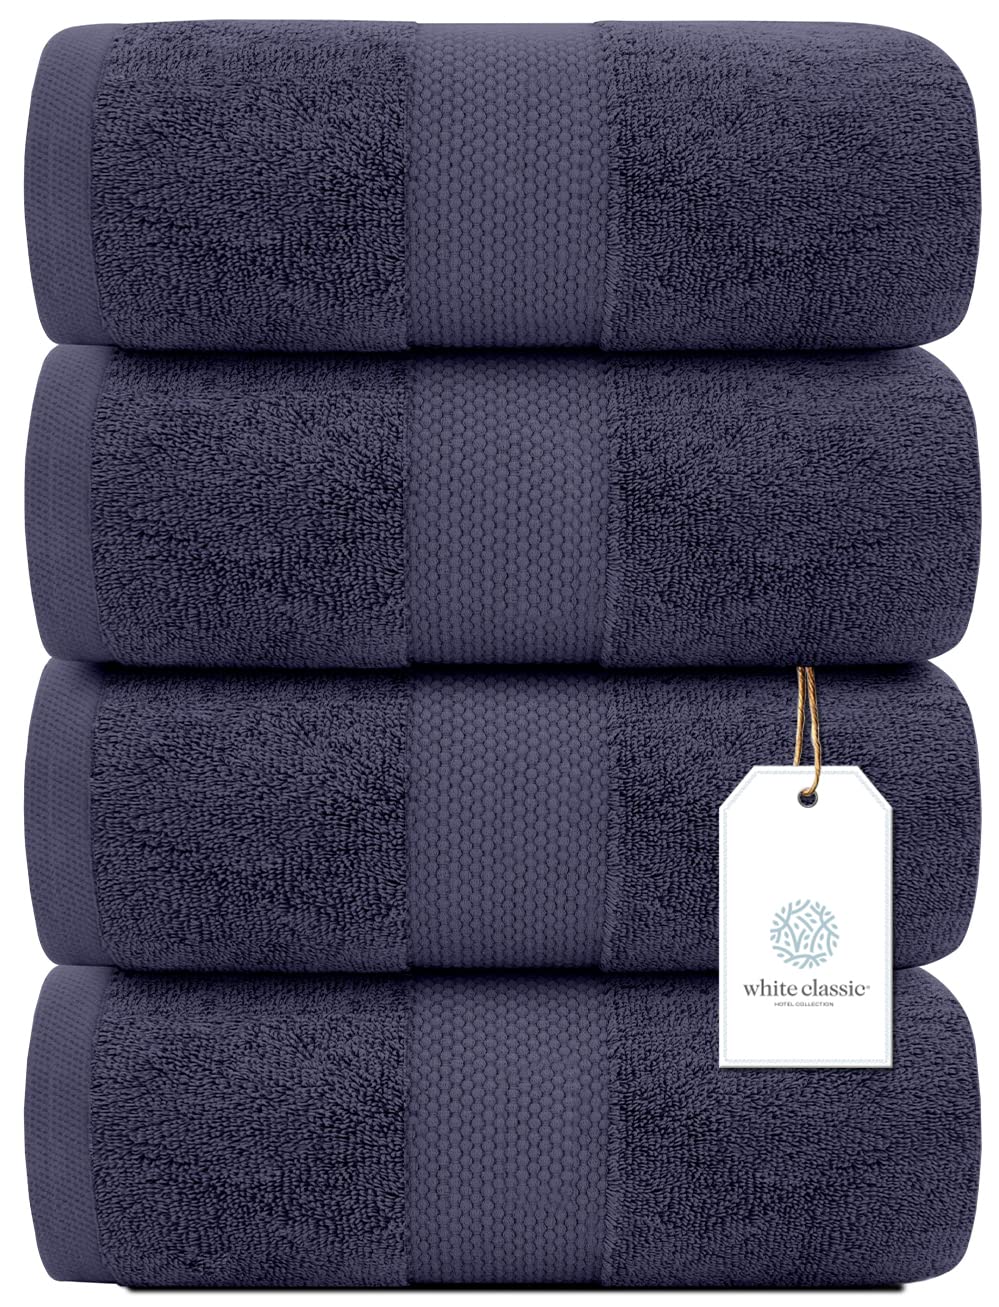 Luxury White Bath Towels Large - 100% Soft Cotton 700 GSM | Absorbent Hotel Bathroom Towel | 27 inch X 54 inch | Set of 4 | Navy  - Like New